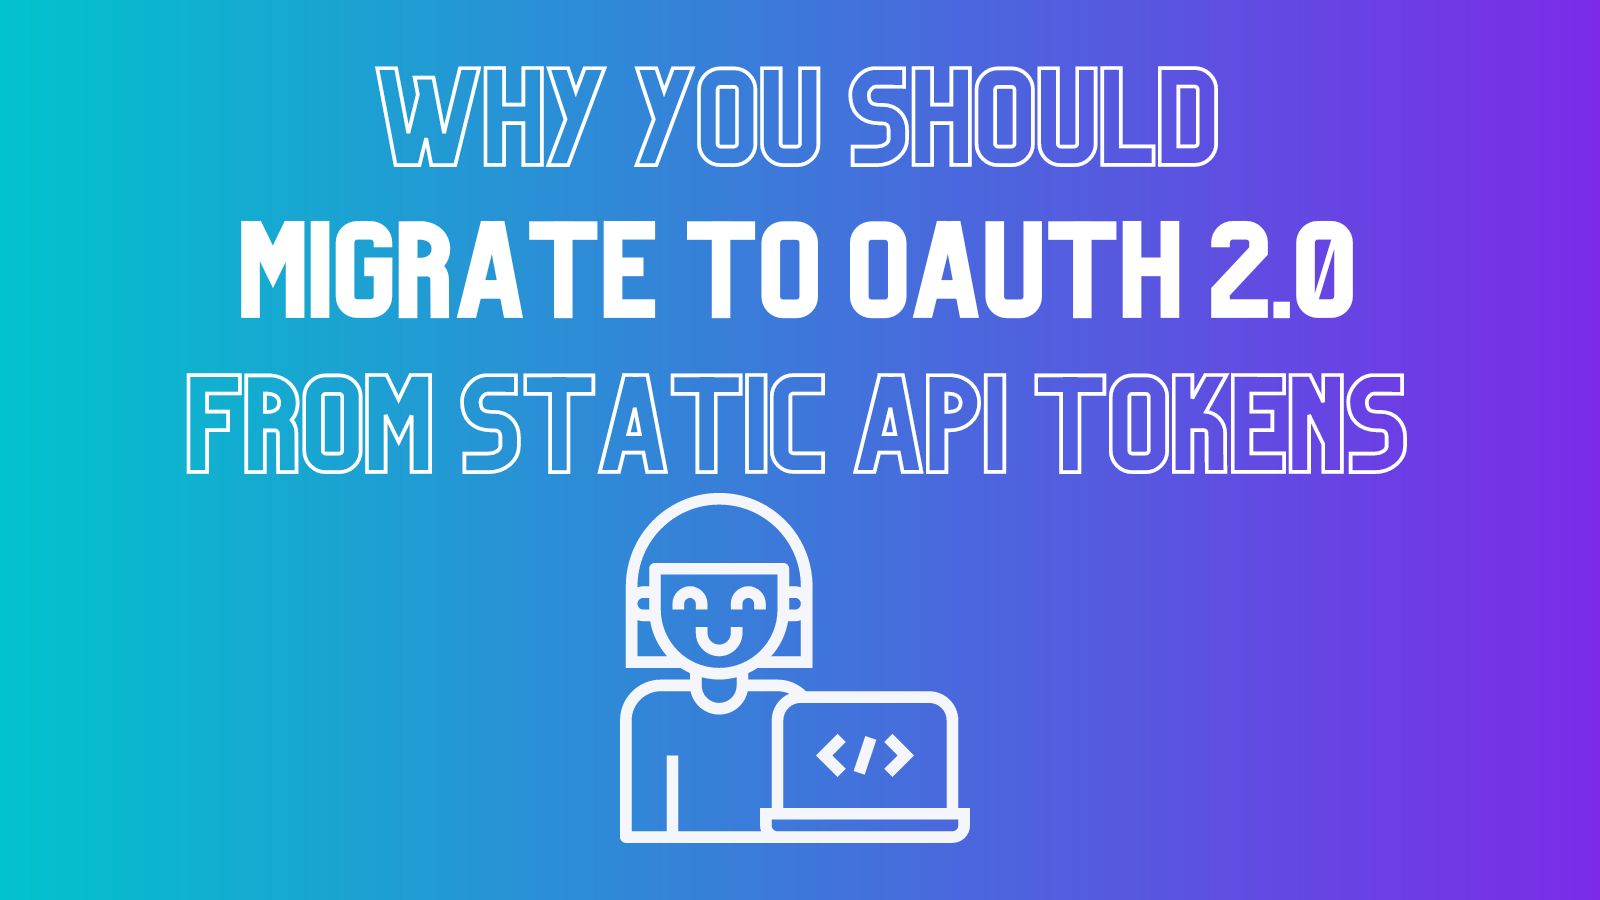 Why You Should Migrate to OAuth 2.0 From Static API Tokens